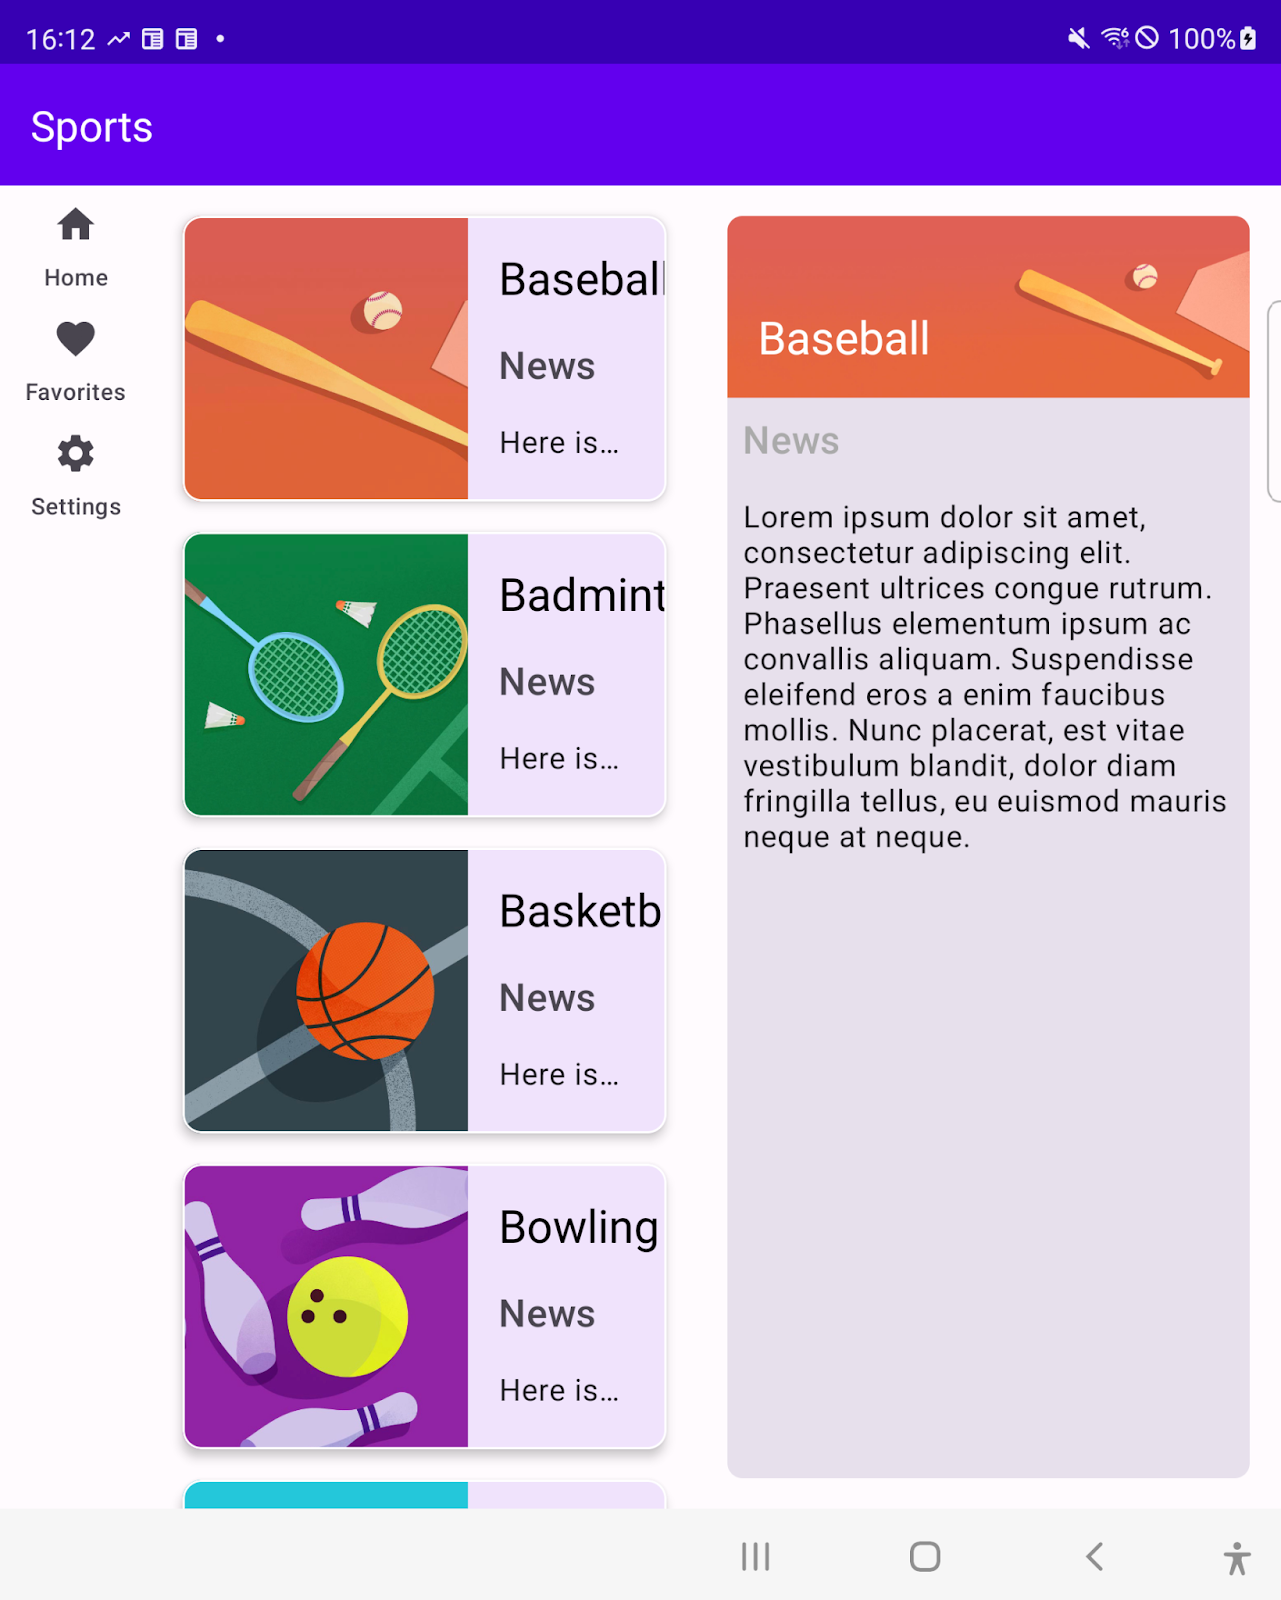 The sports app shows a list of sports and sports news side-by-side on a medium window. A navigation rail shows up as a  top navigation component. 